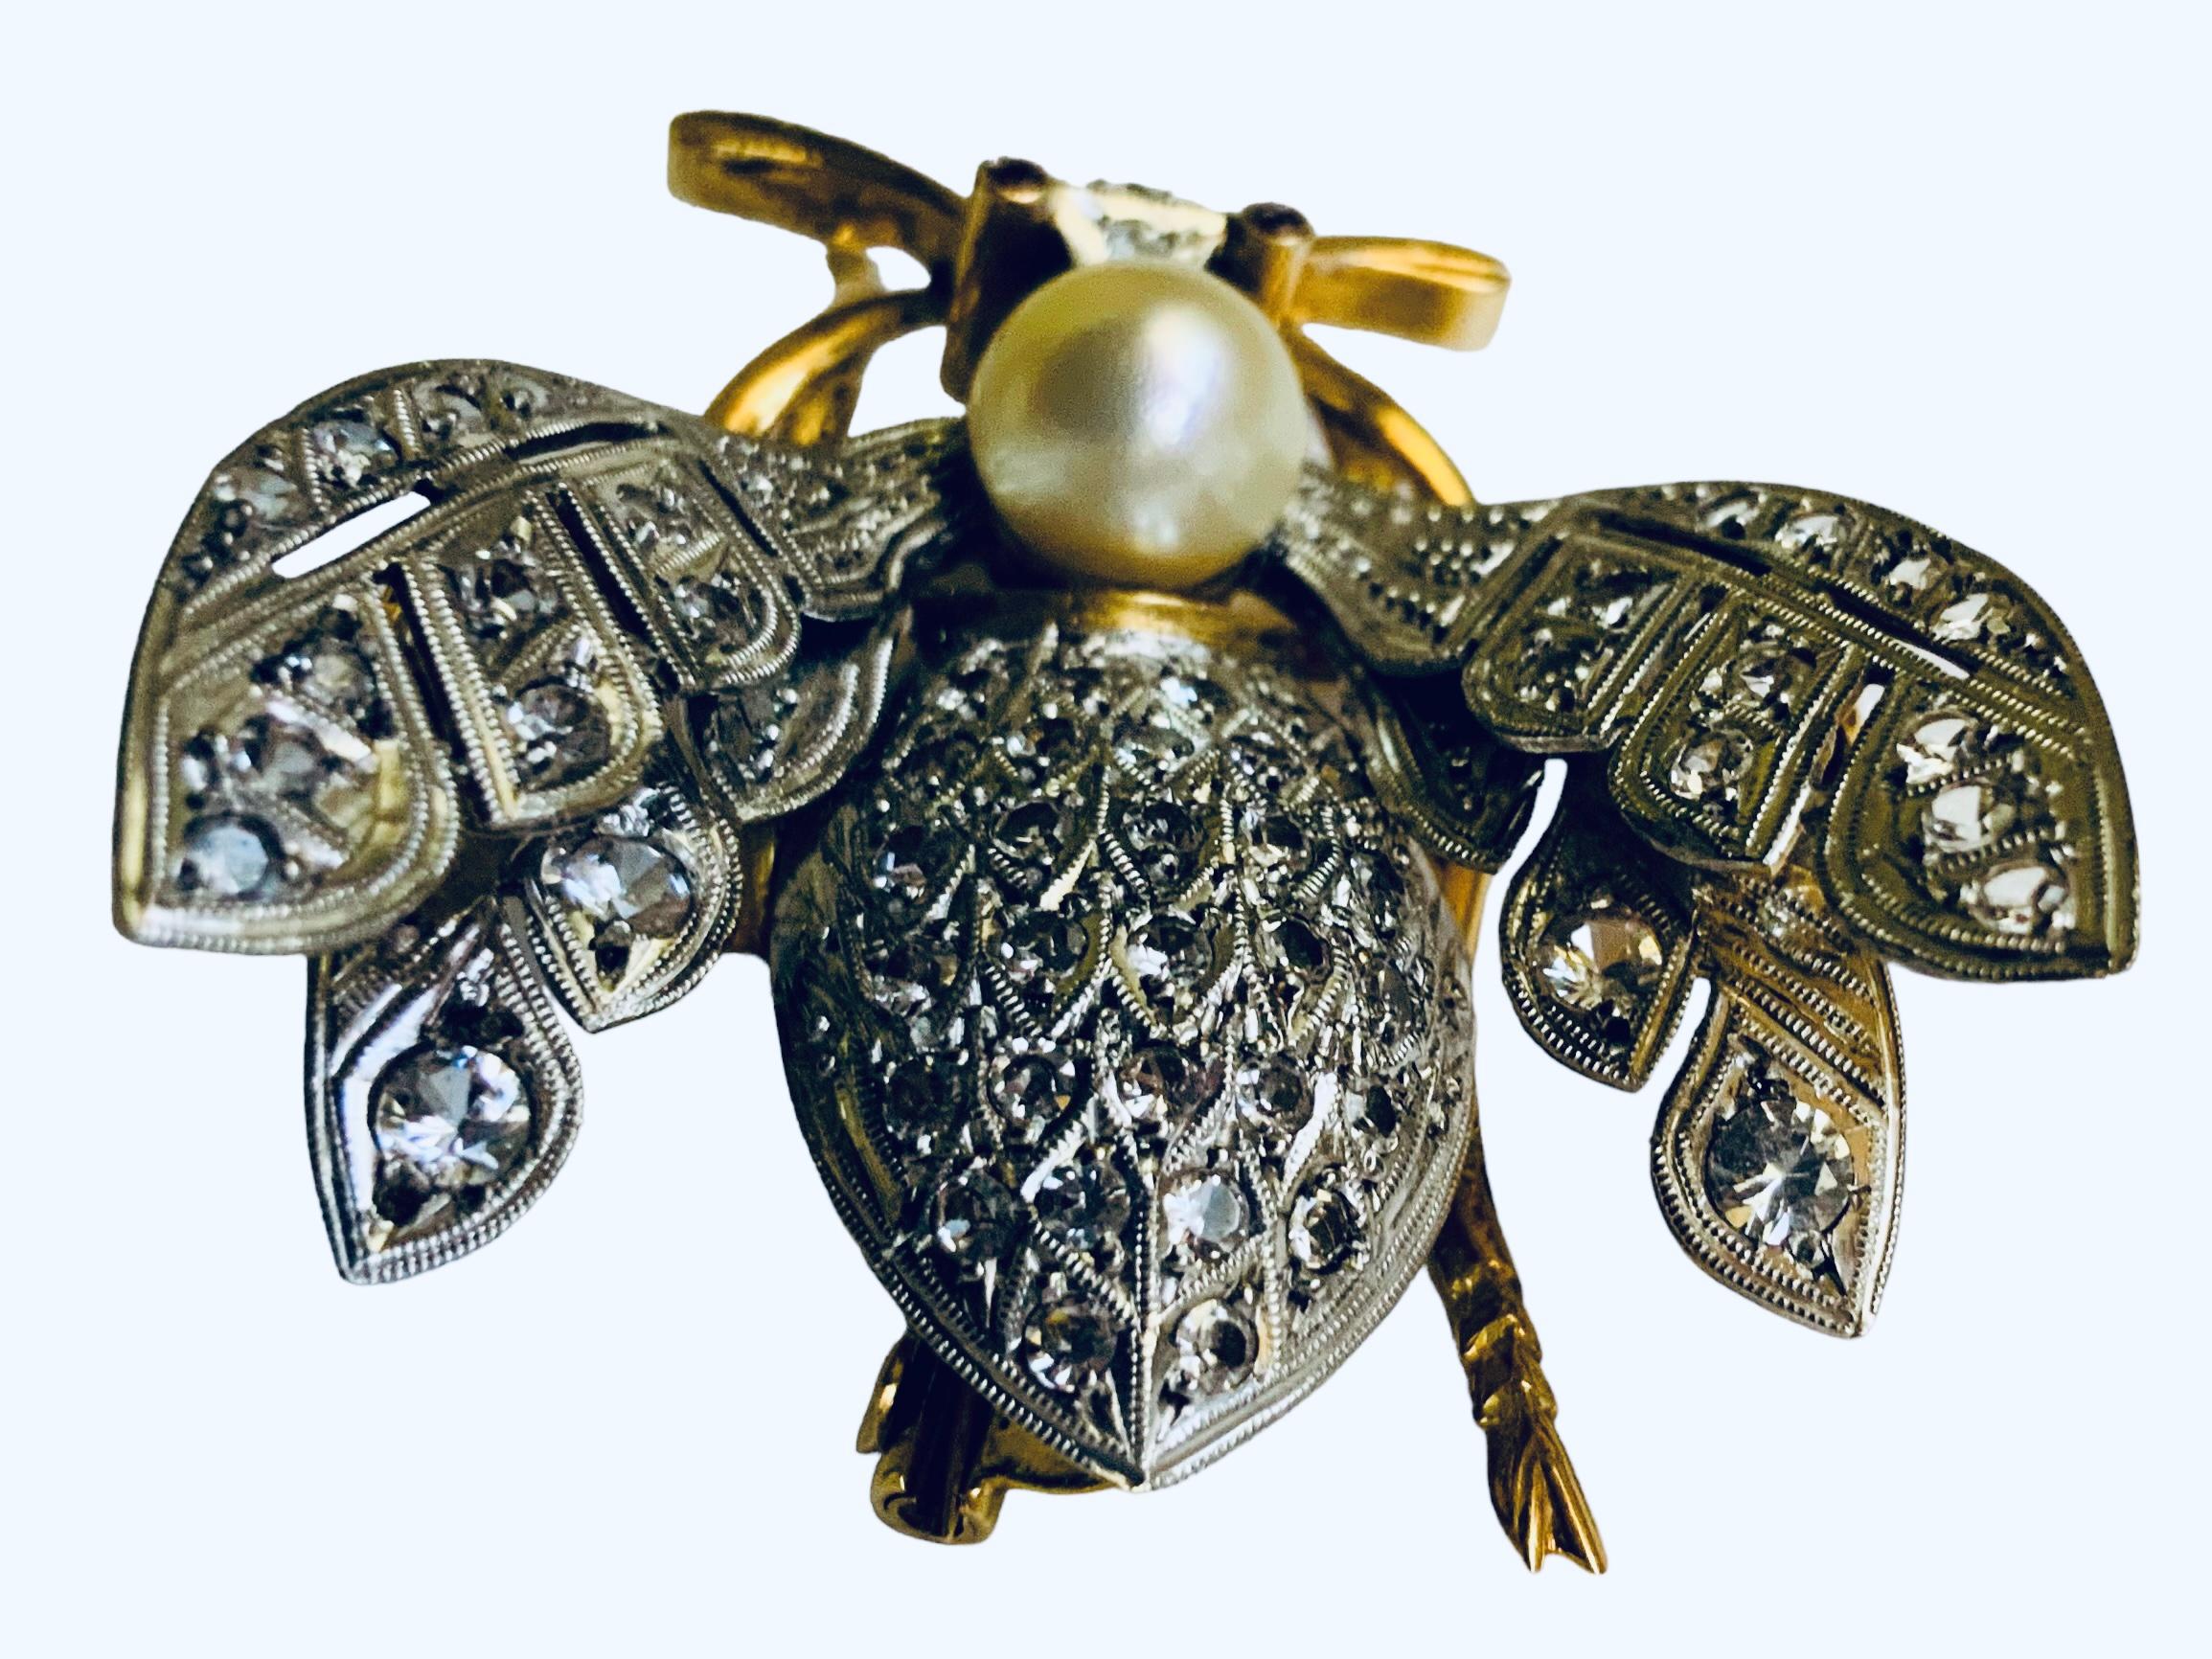 This is an 18K White and Yellow Gold Diamonds, Pearl and Rubies Insect Brooch. A very well done brooch that depicts a large bee body and wings adorned with a cluster of sparkling tiny diamonds in pave setting. The head of the bee is made by a round